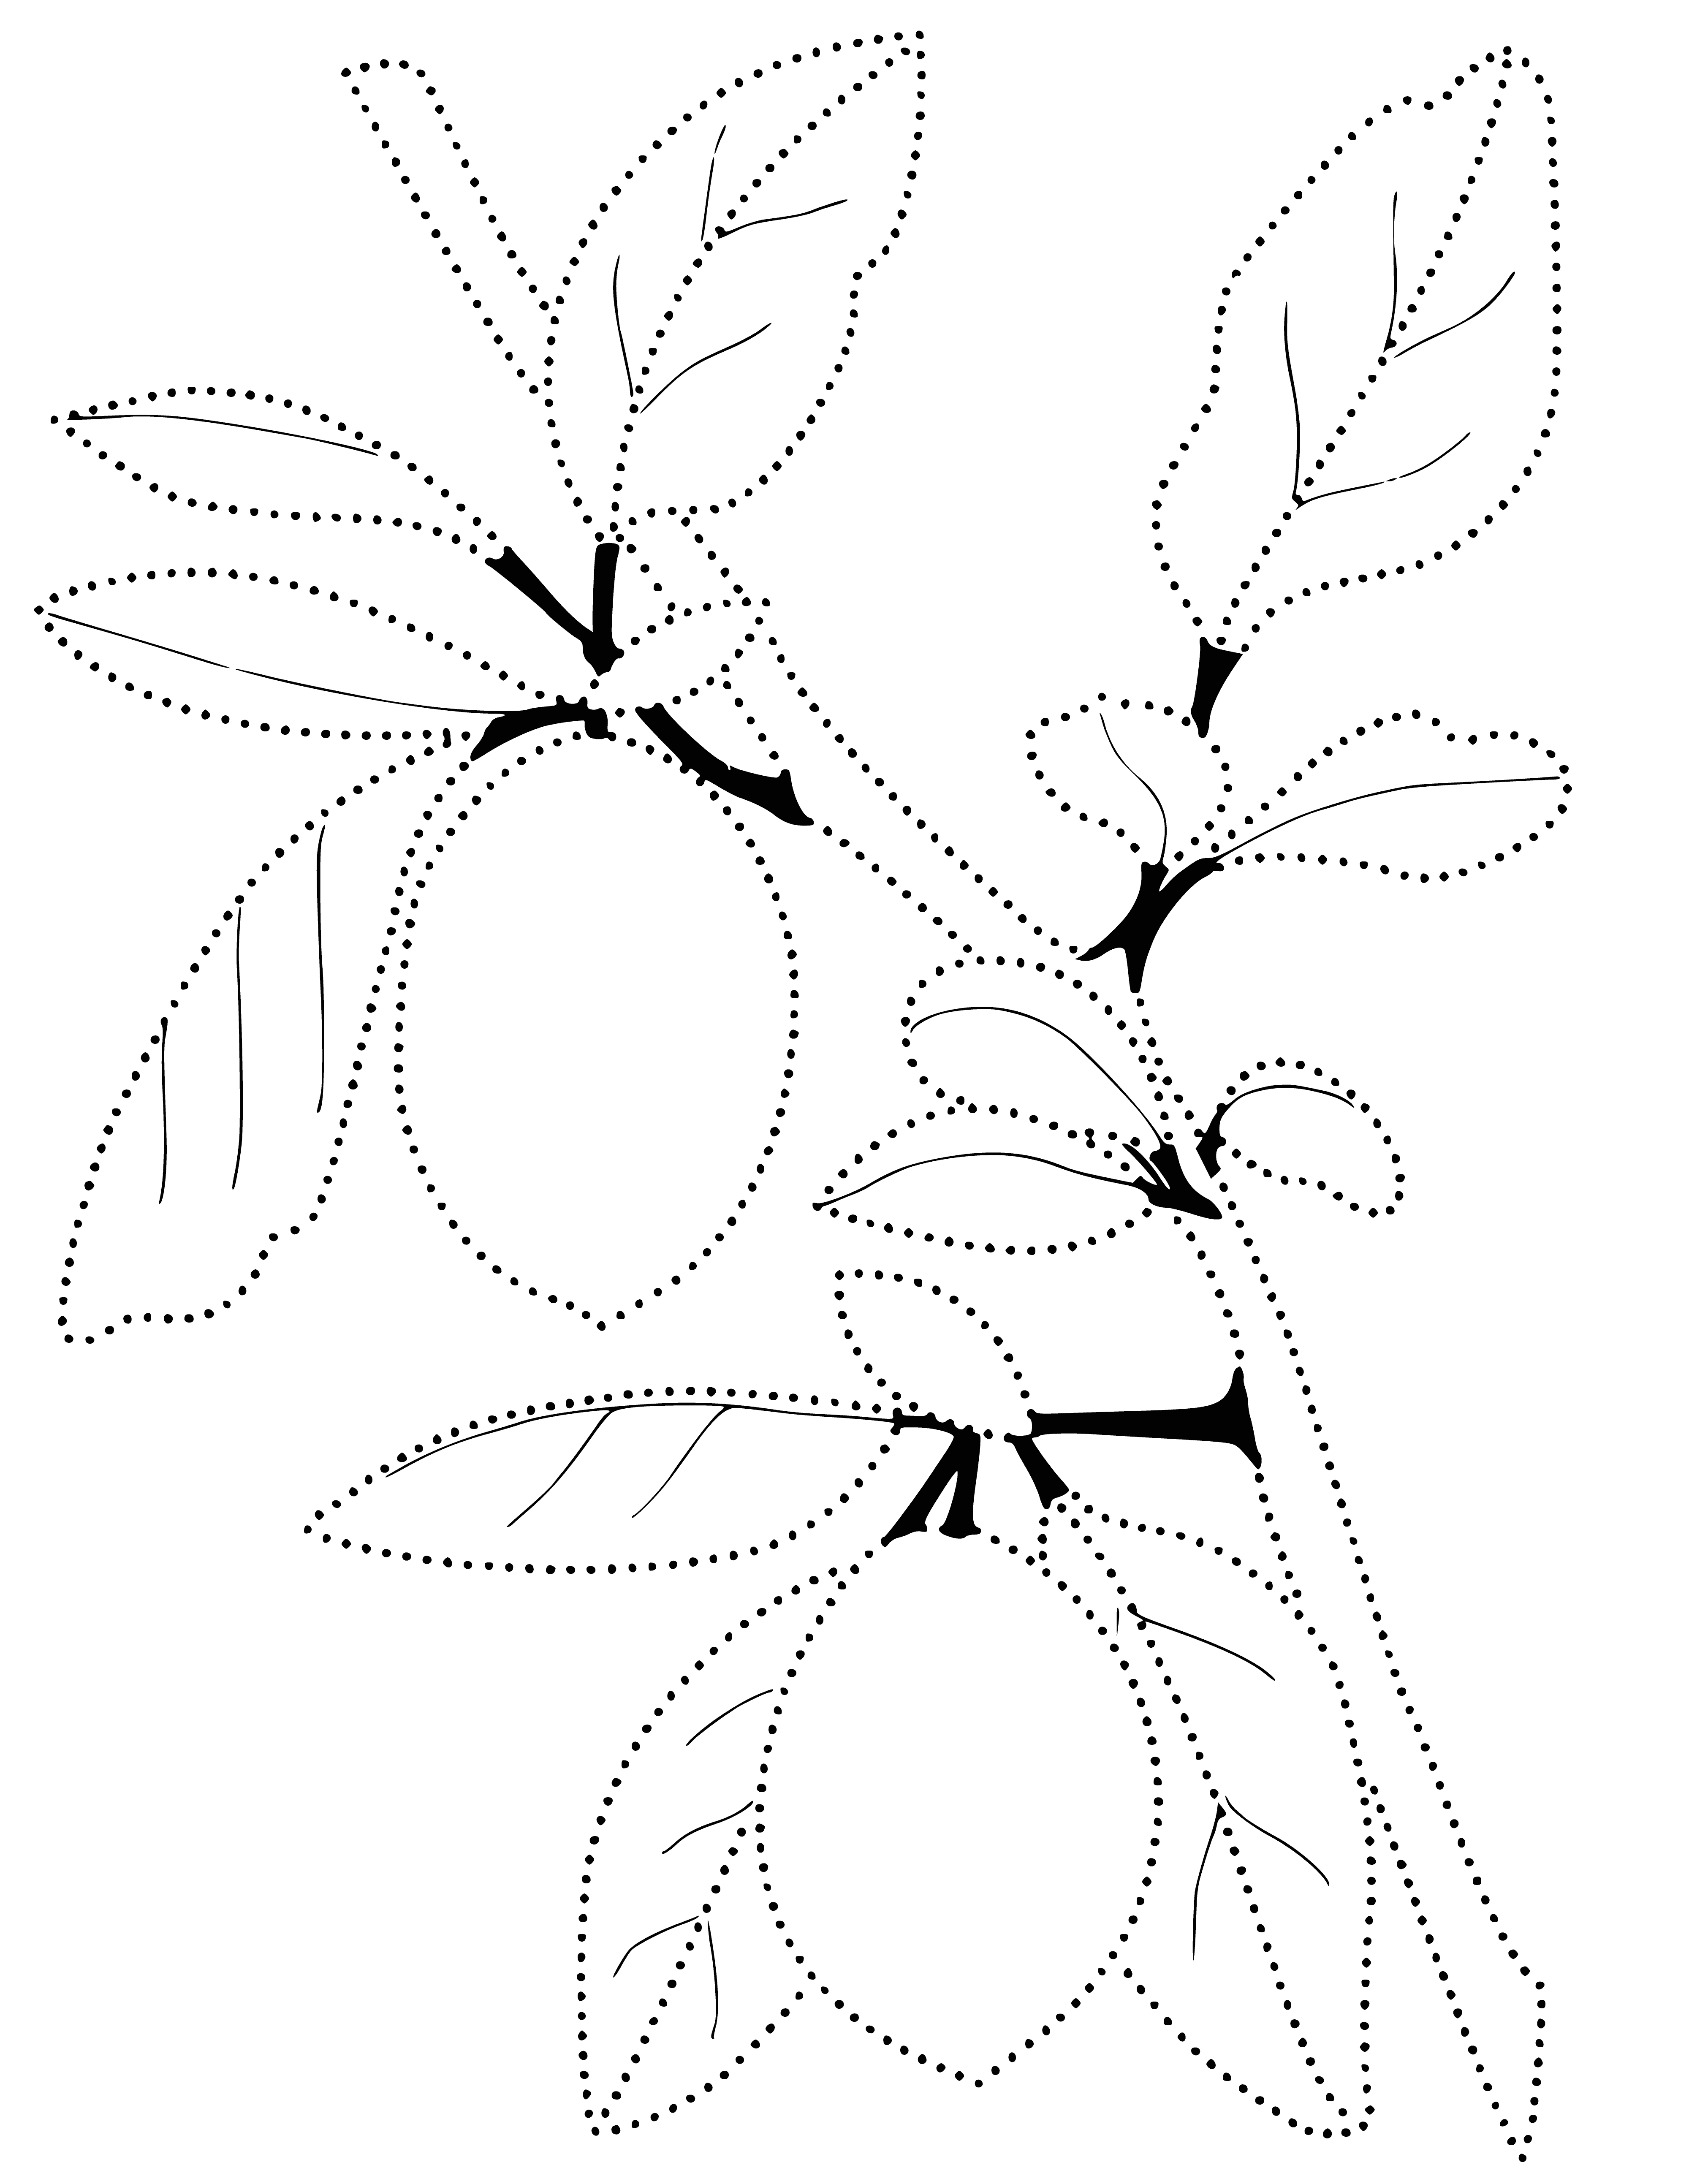 coloring page: Grown worldwide and used in a variety of dishes, its juice is a popular ingredient.

Biting into a lemon gets a sour surprise, they're grown worldwide and popular in cooking. #CitrusFruit